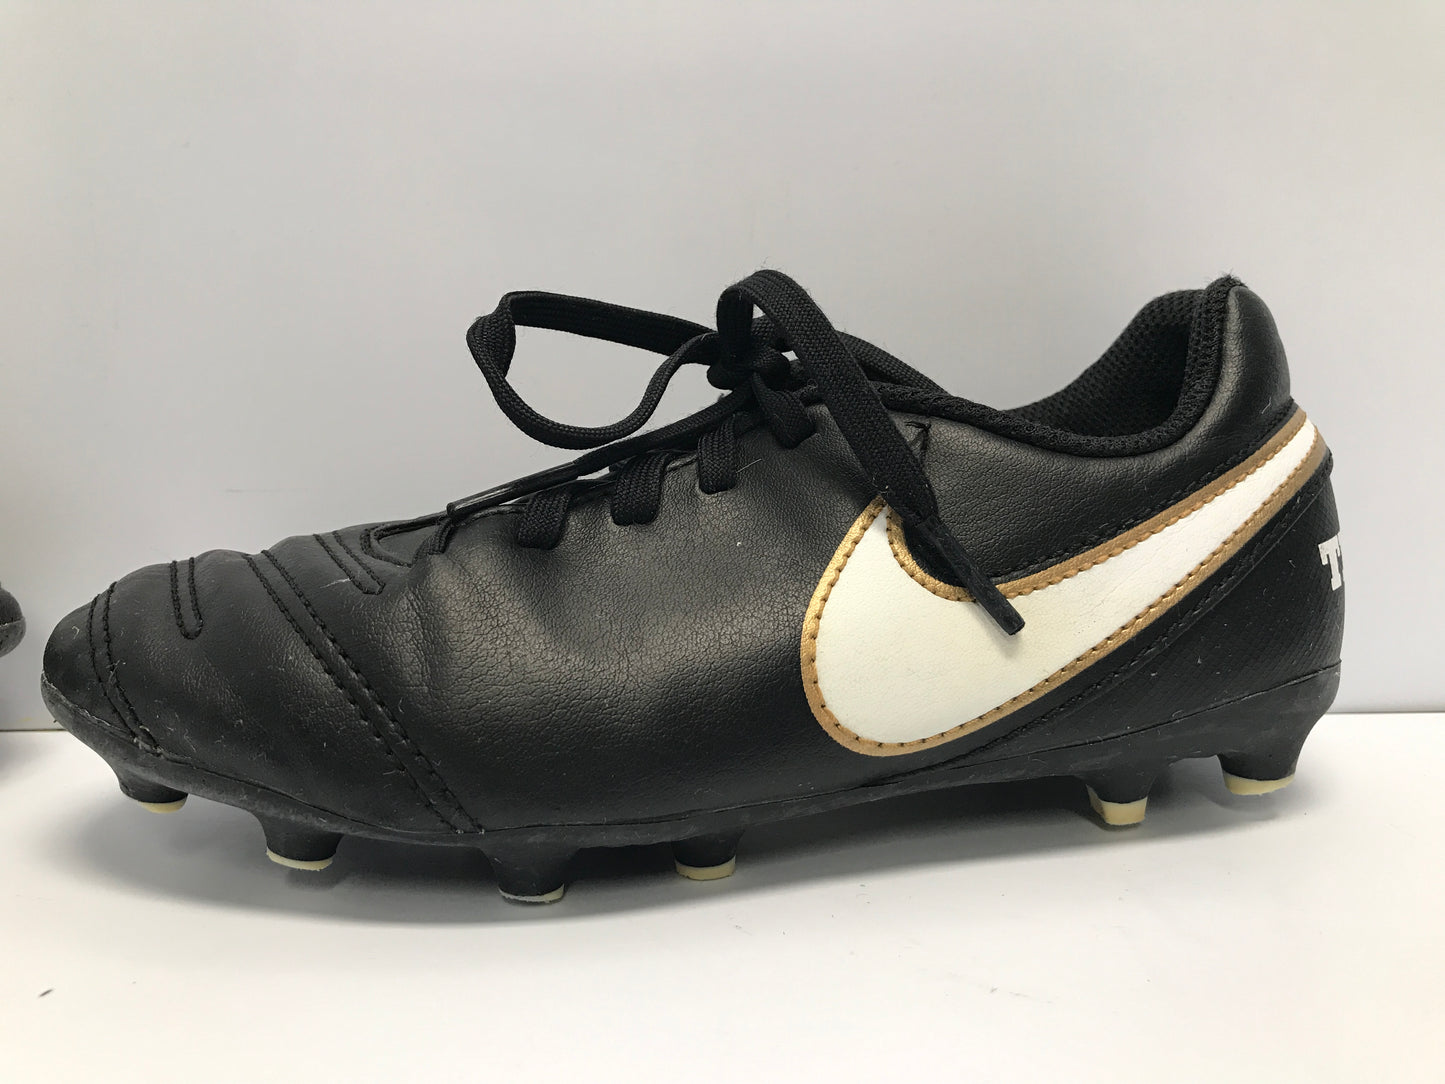 Soccer Shoes Cleats Child Size 1 Nike Tiempo Black White Gold